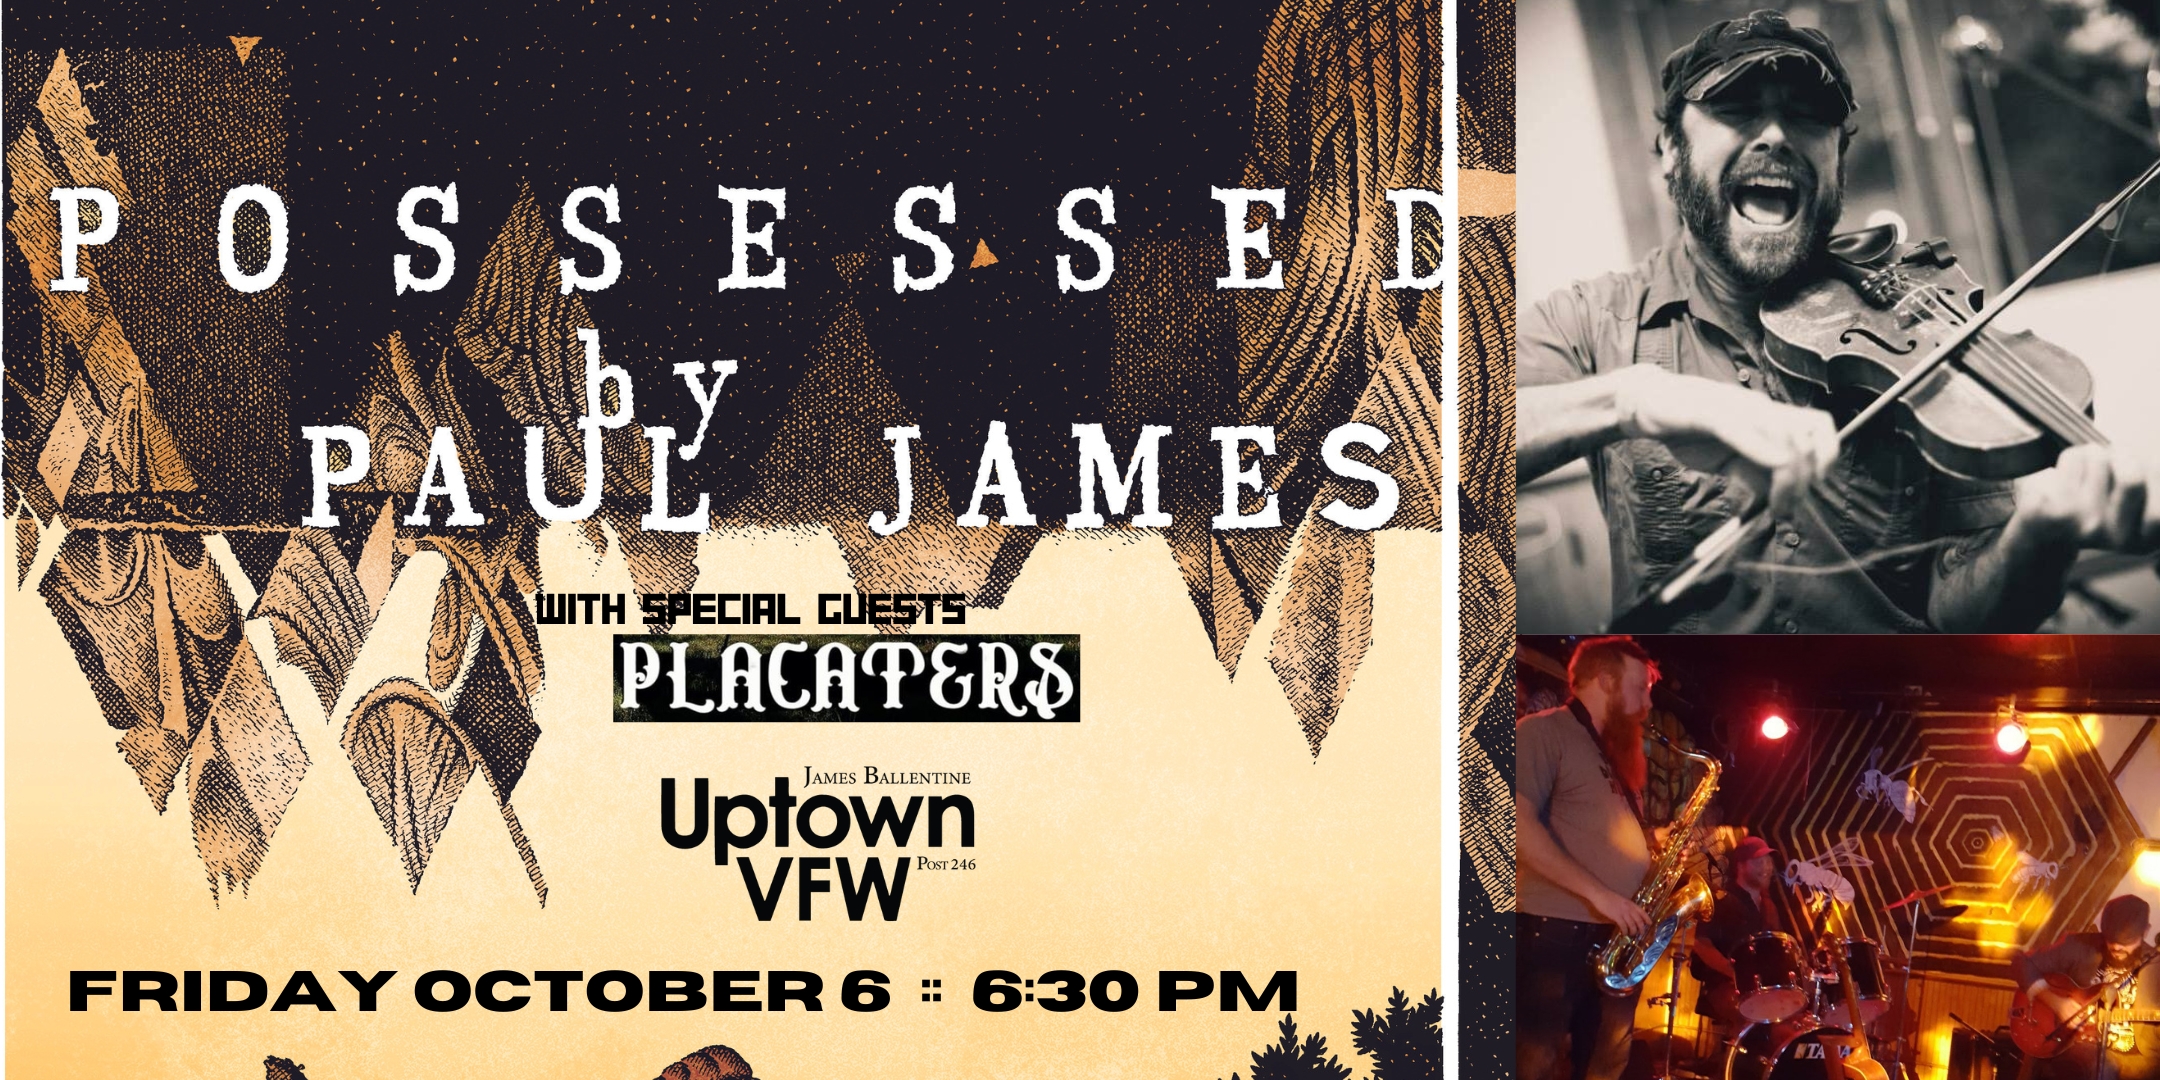 Possessed By Paul James with Placaters Friday, October 6 James Ballentine "Uptown" VFW Post 246 Doors 6:30pm :: Music 7:00pm :: 21+ $13 Early Bird / $15 Advance / $20 Day of Show